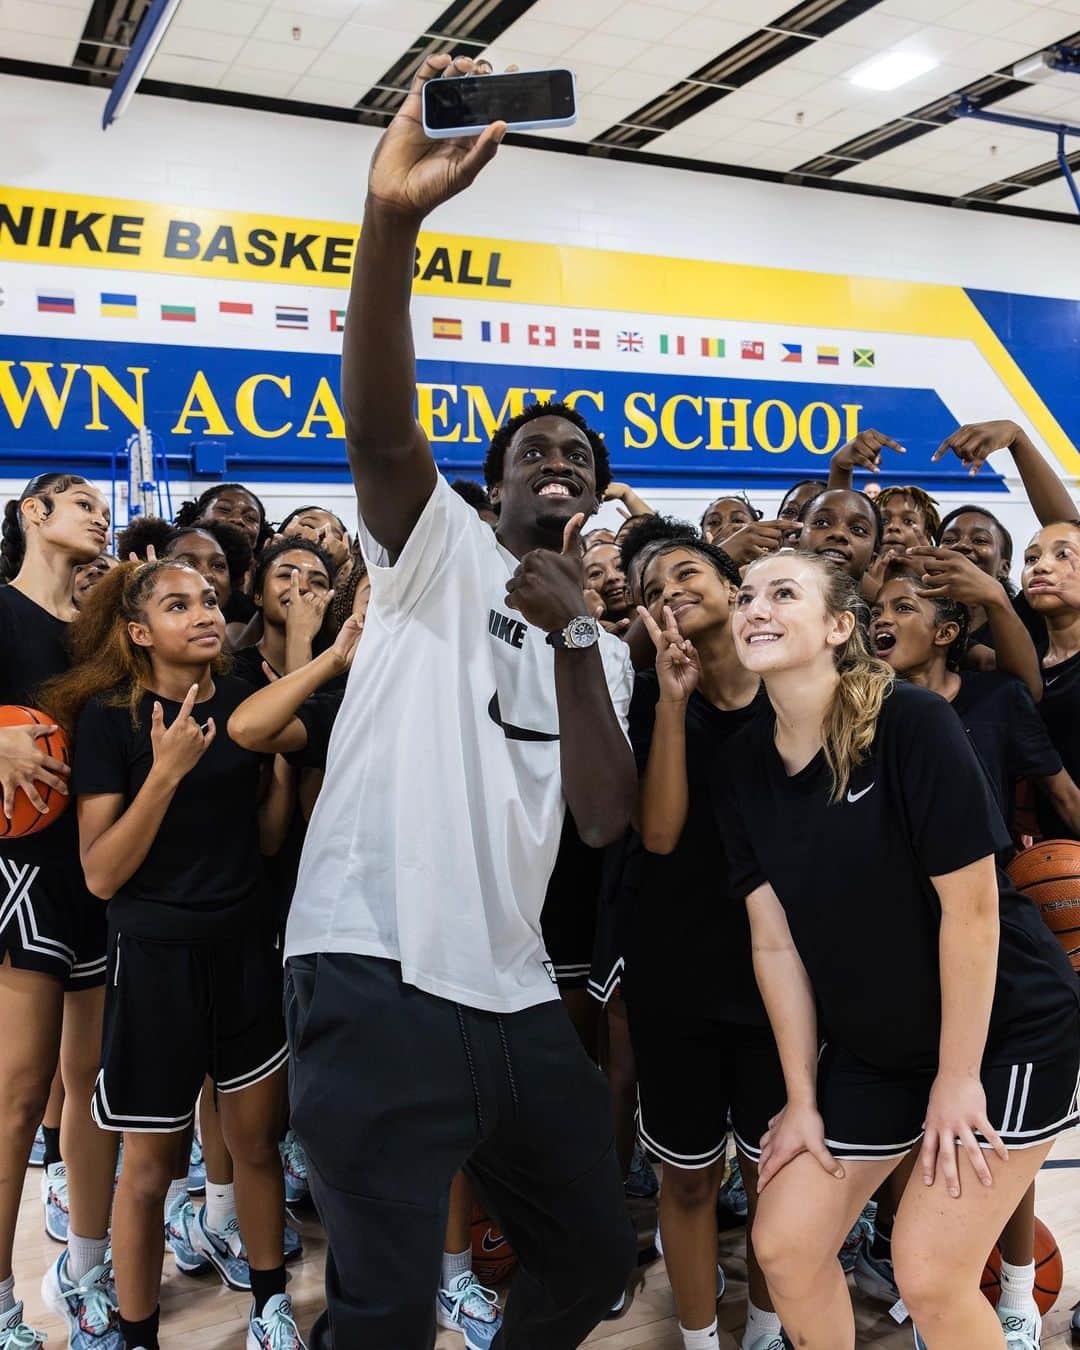 Nike Basketballのインスタグラム：「There are no limits to her game. ✨  Pascal Siakam showed up in Toronto to help grow girls’ basketball. With his guidance we saw young female athletes light up the court, boldly breaking down barriers for generations to come.   The support from @pskills43 served as inspiration for all future hoopers, showing the power of community within sports. #OnlyBasketball」